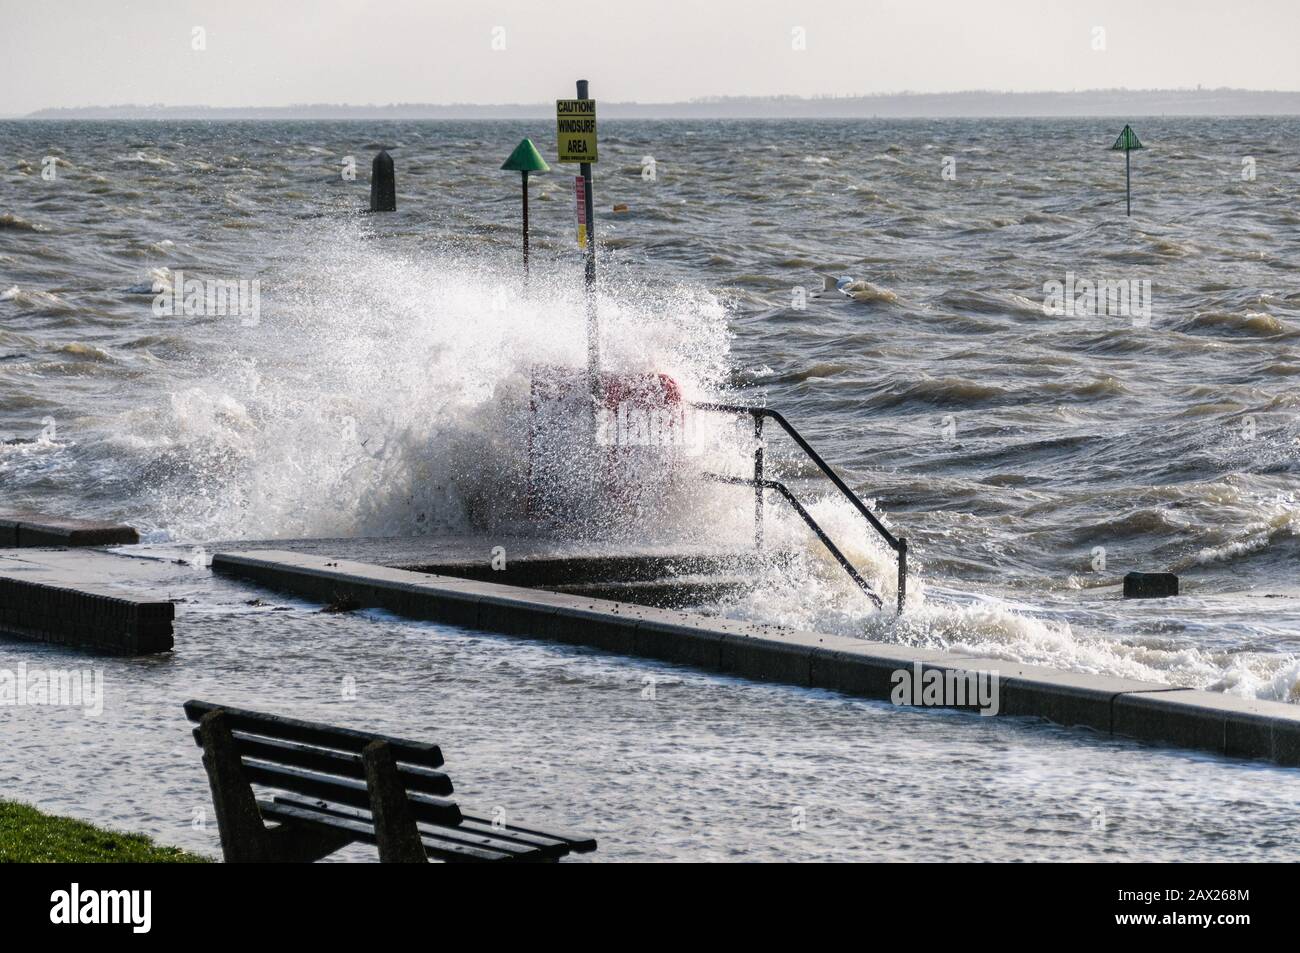 Southend, Essex, UK - 10 february 2020: Storm Ciara Brings high winds and rough seas to Britains coastlines. Stock Photo